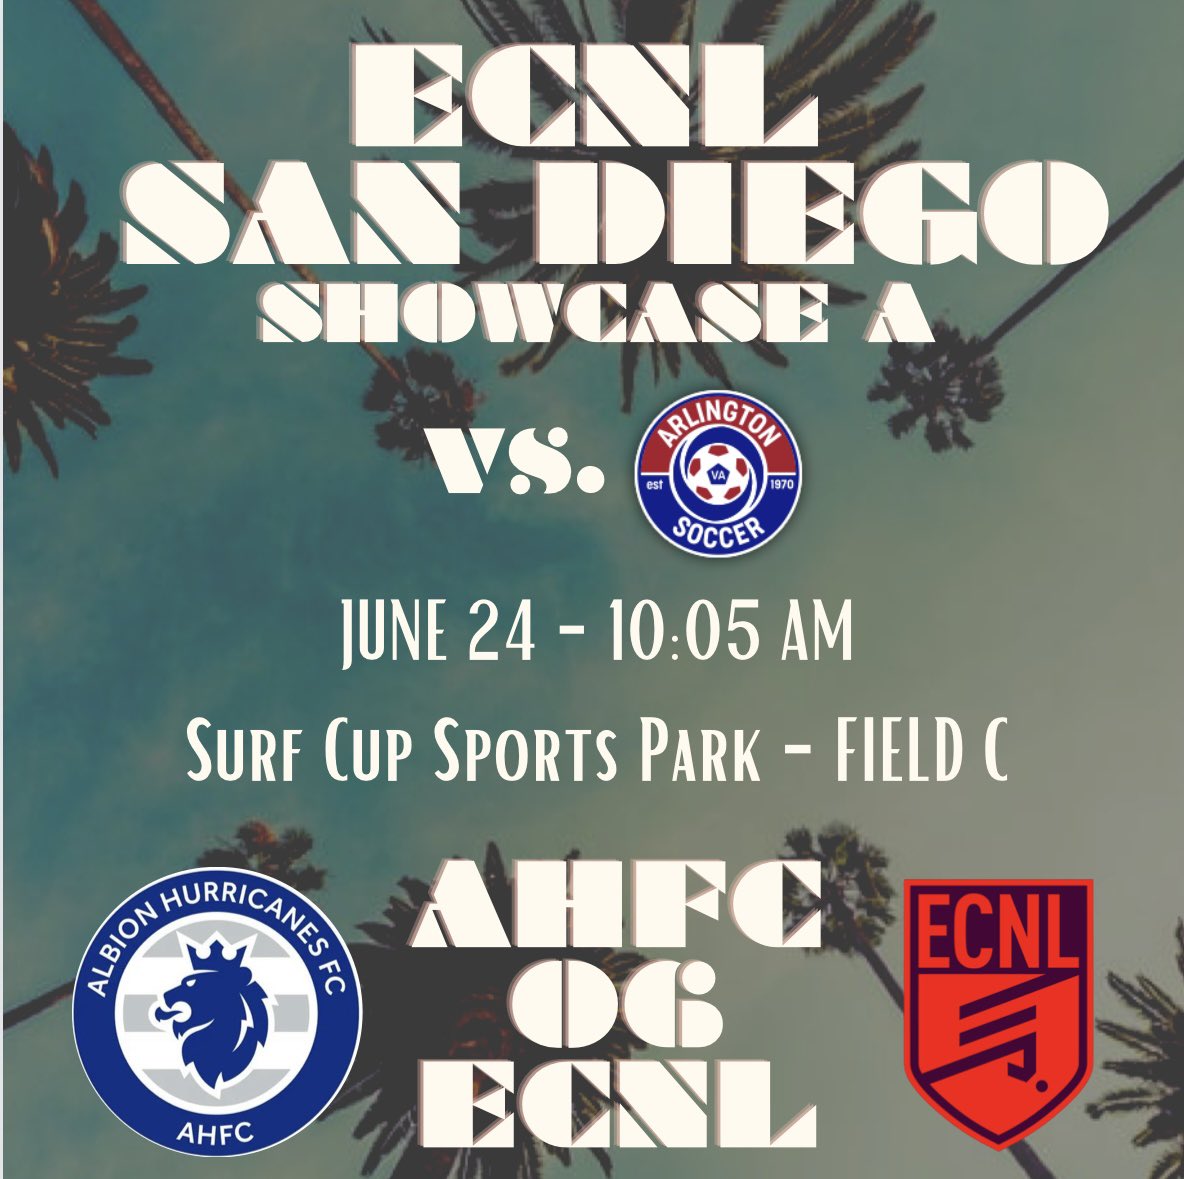 Just a few more days until we head to San Diego for the @ECNLgirls Showcase! 💪💙

🌊☀️✈️

Coaches come 👀 check us out! 

#ahfcfamily #ahfcsoccer #ahfcpride